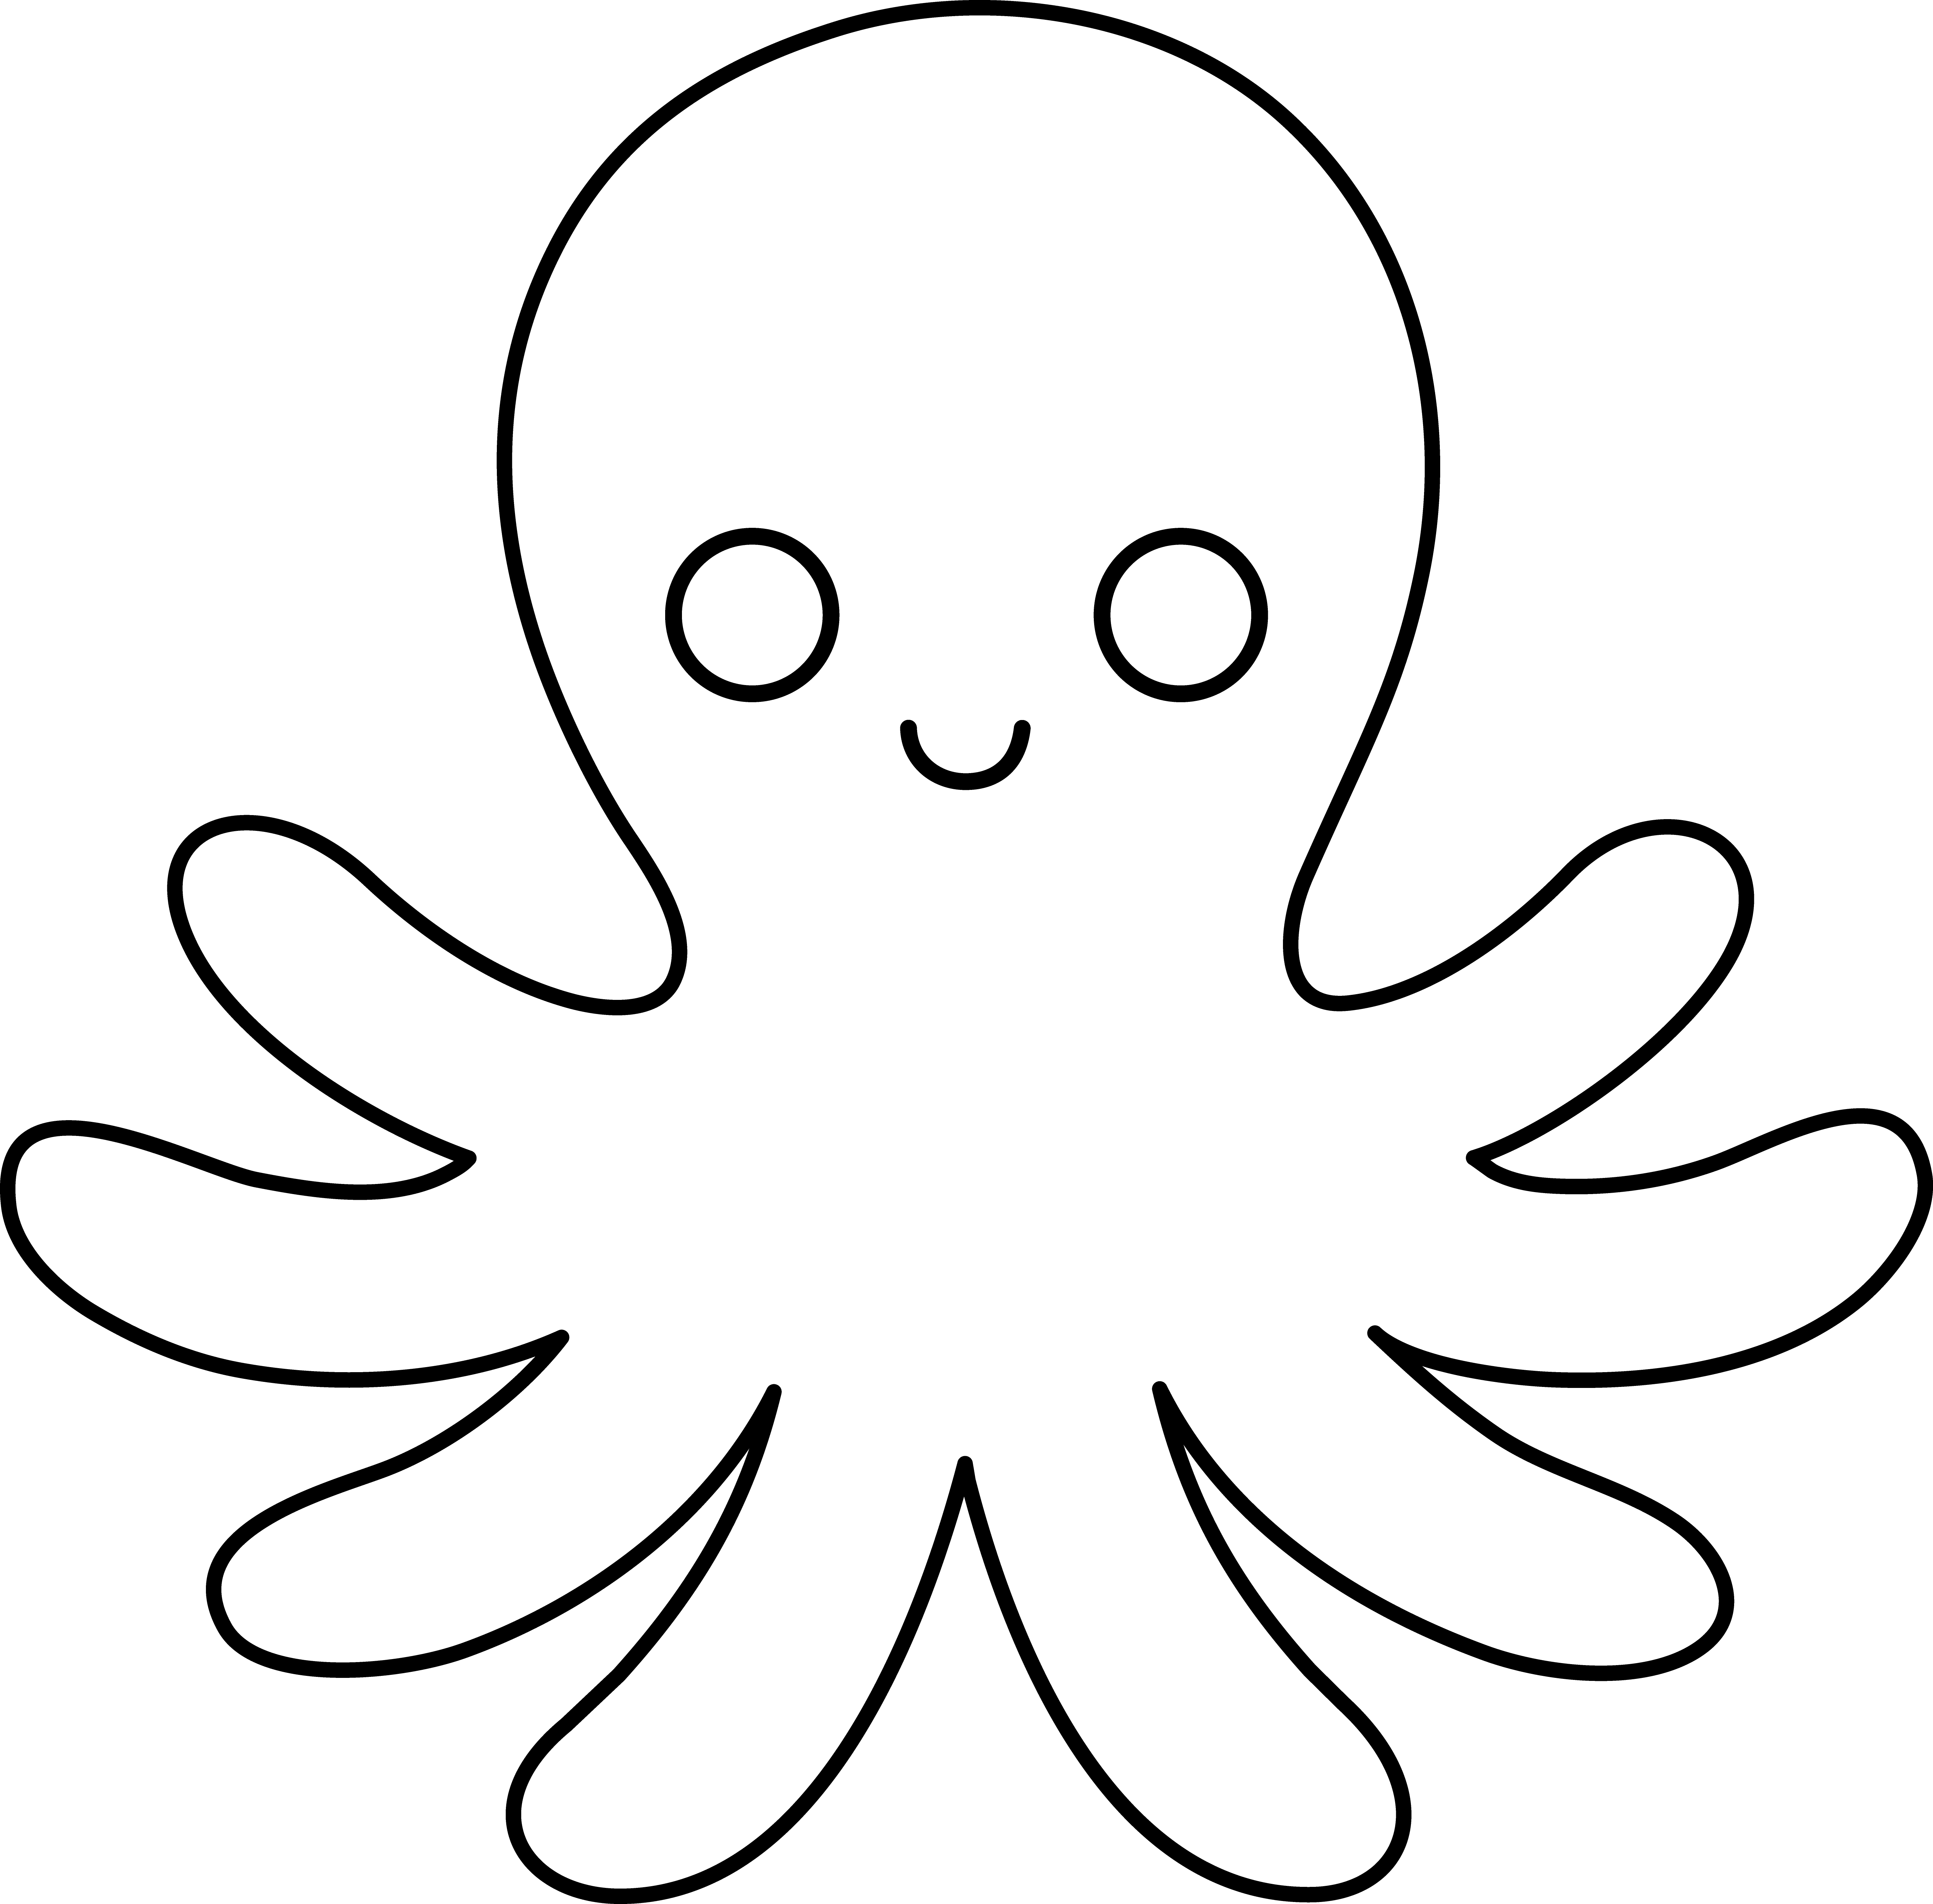 cute octopus coloring pages